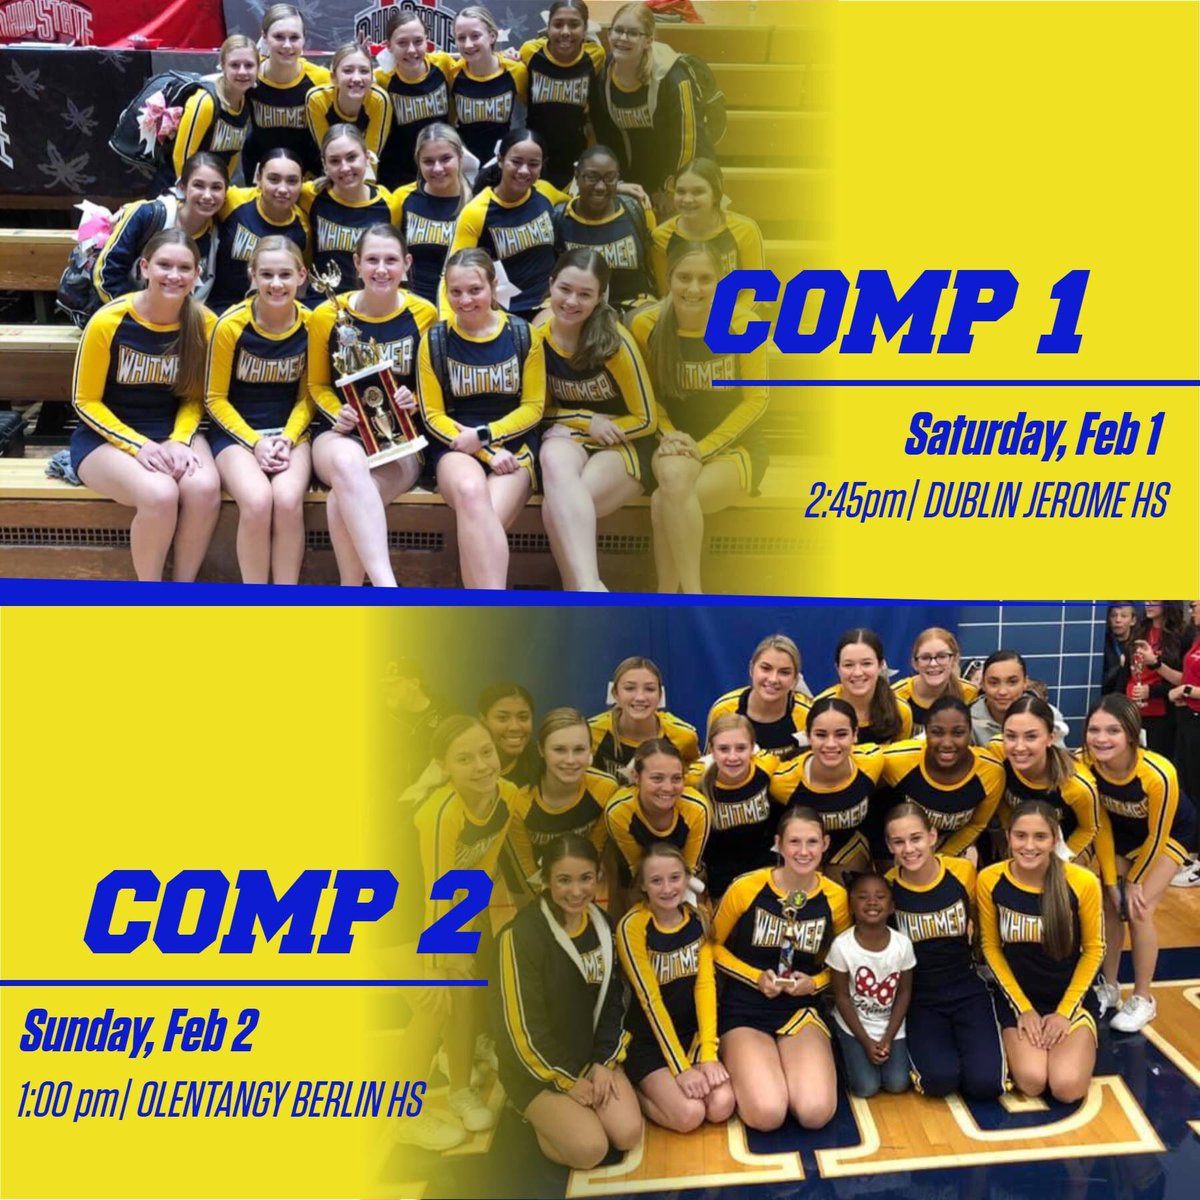 Take a road trip this weekend and come see us!!!! #VarsityCompetition #GAMEDAY #Cheercompetition